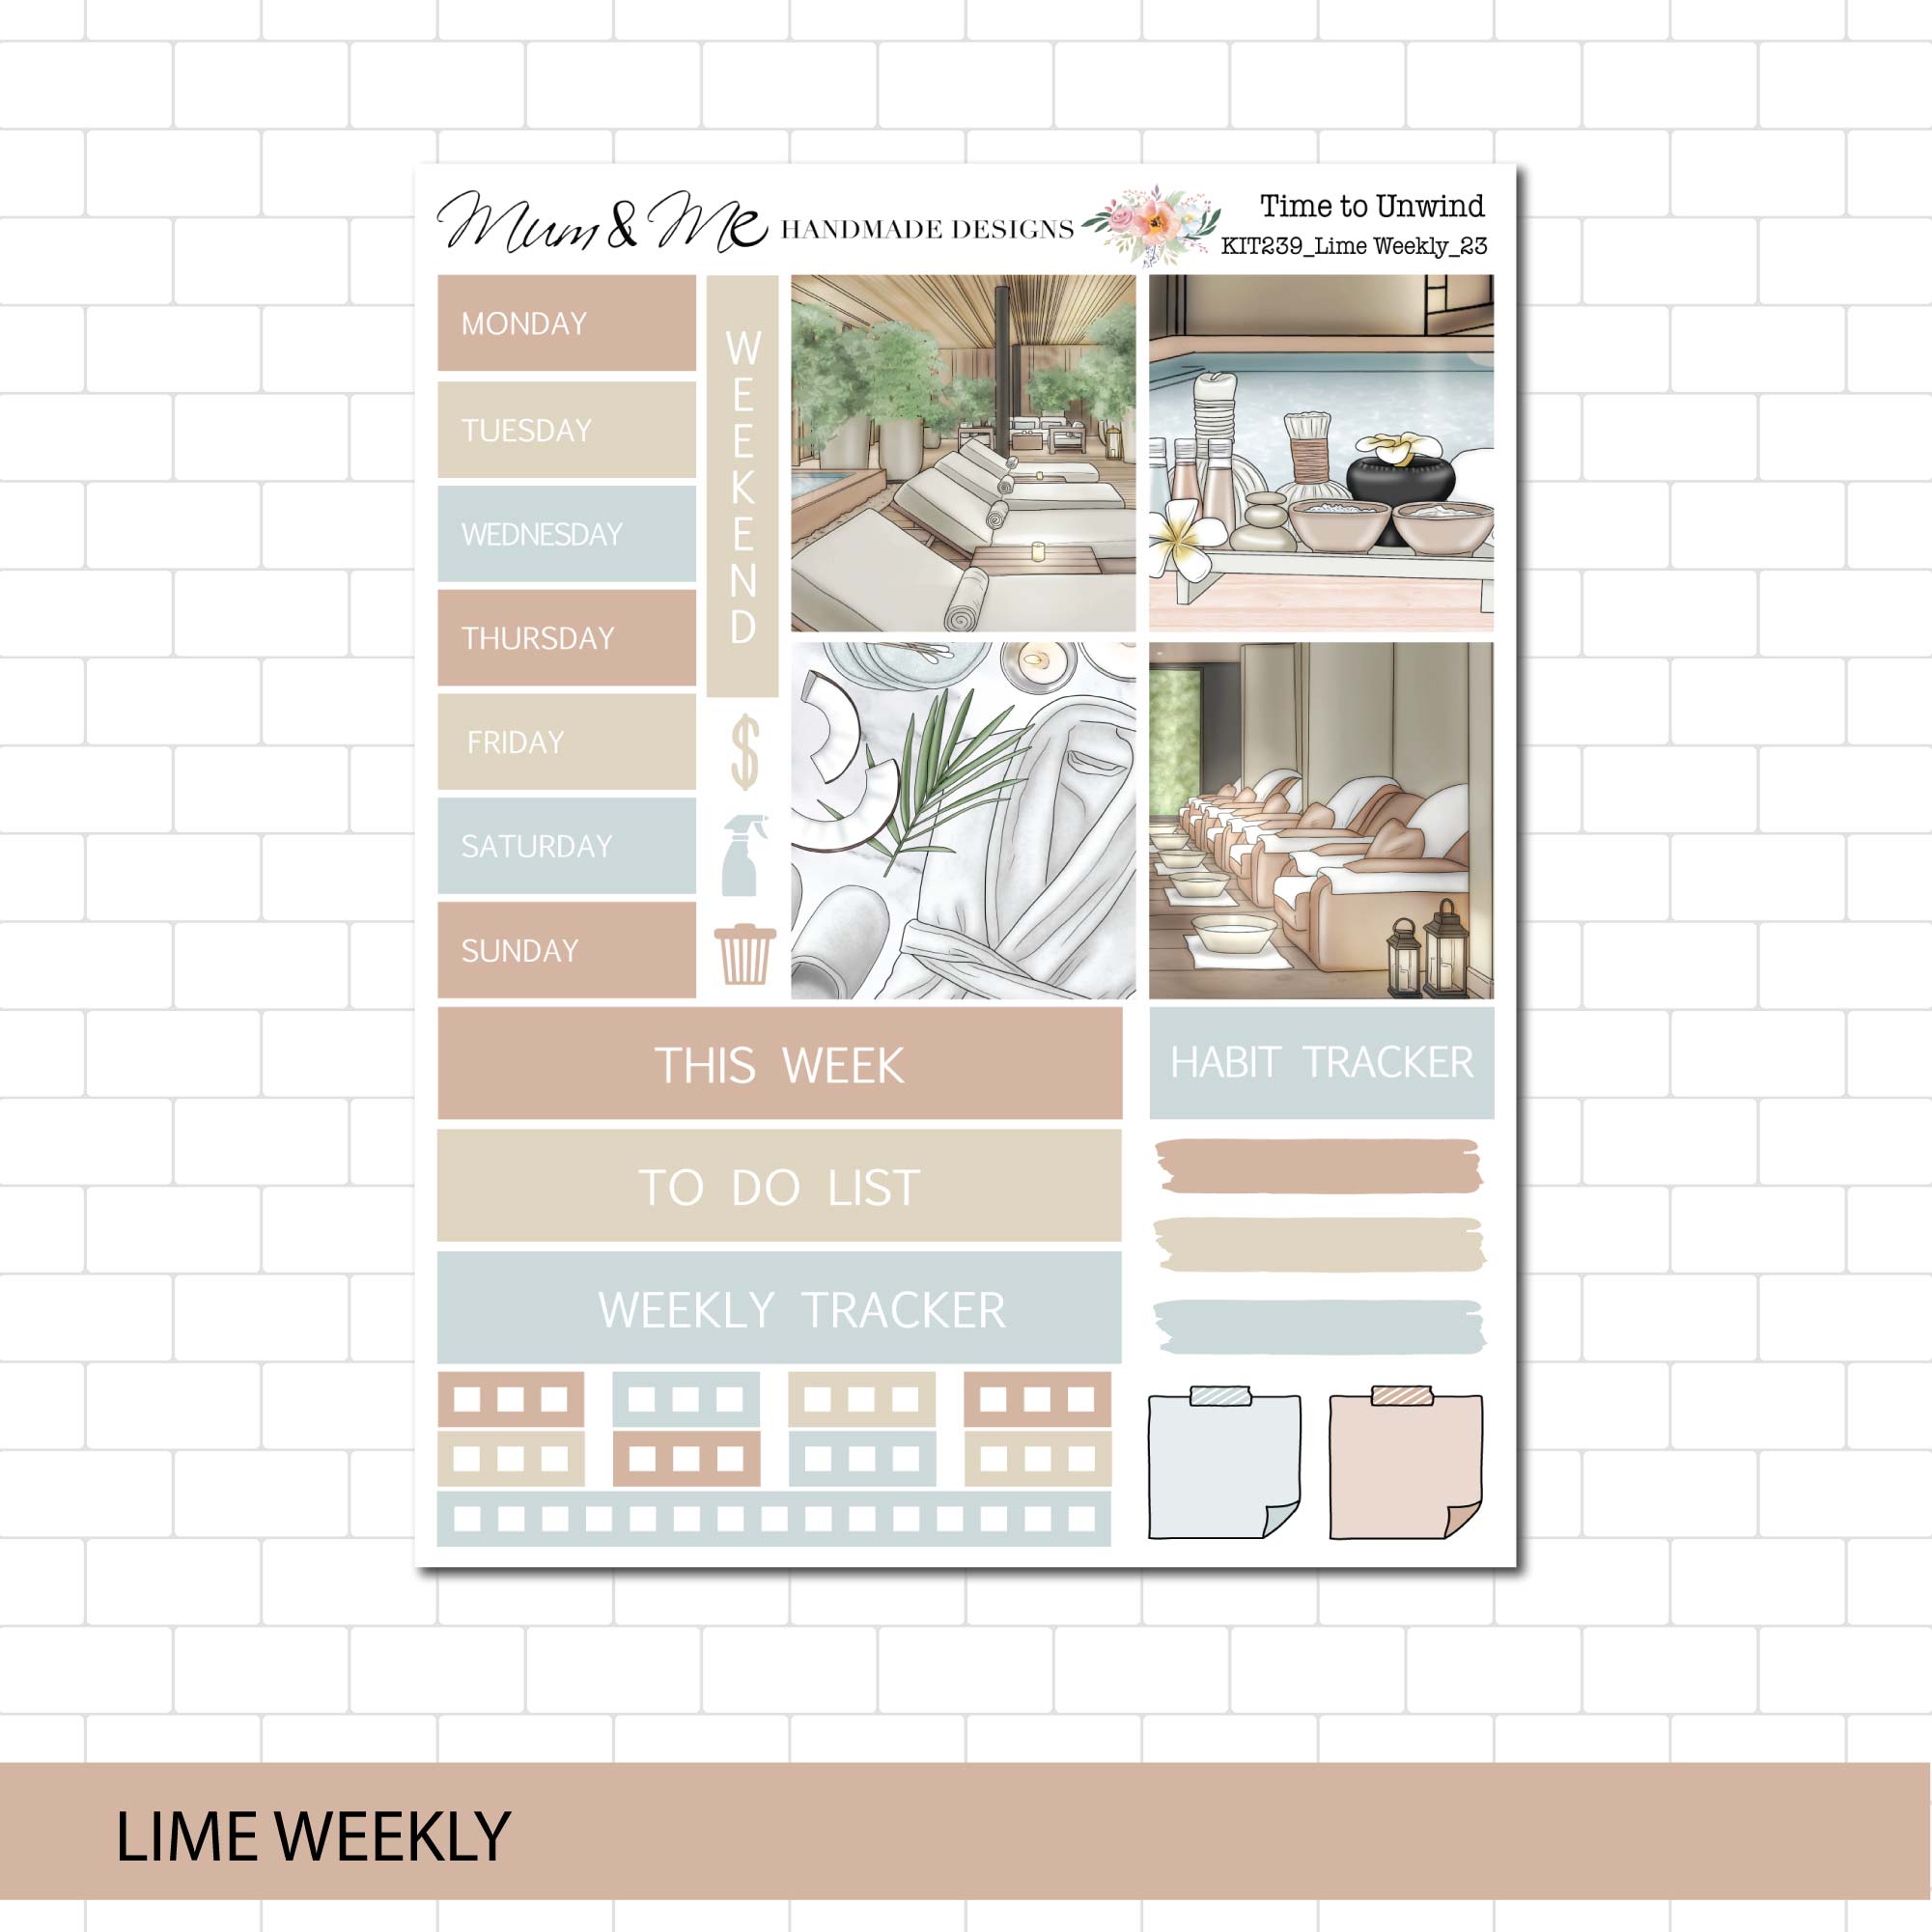 Lime Weekly: Time to Unwind